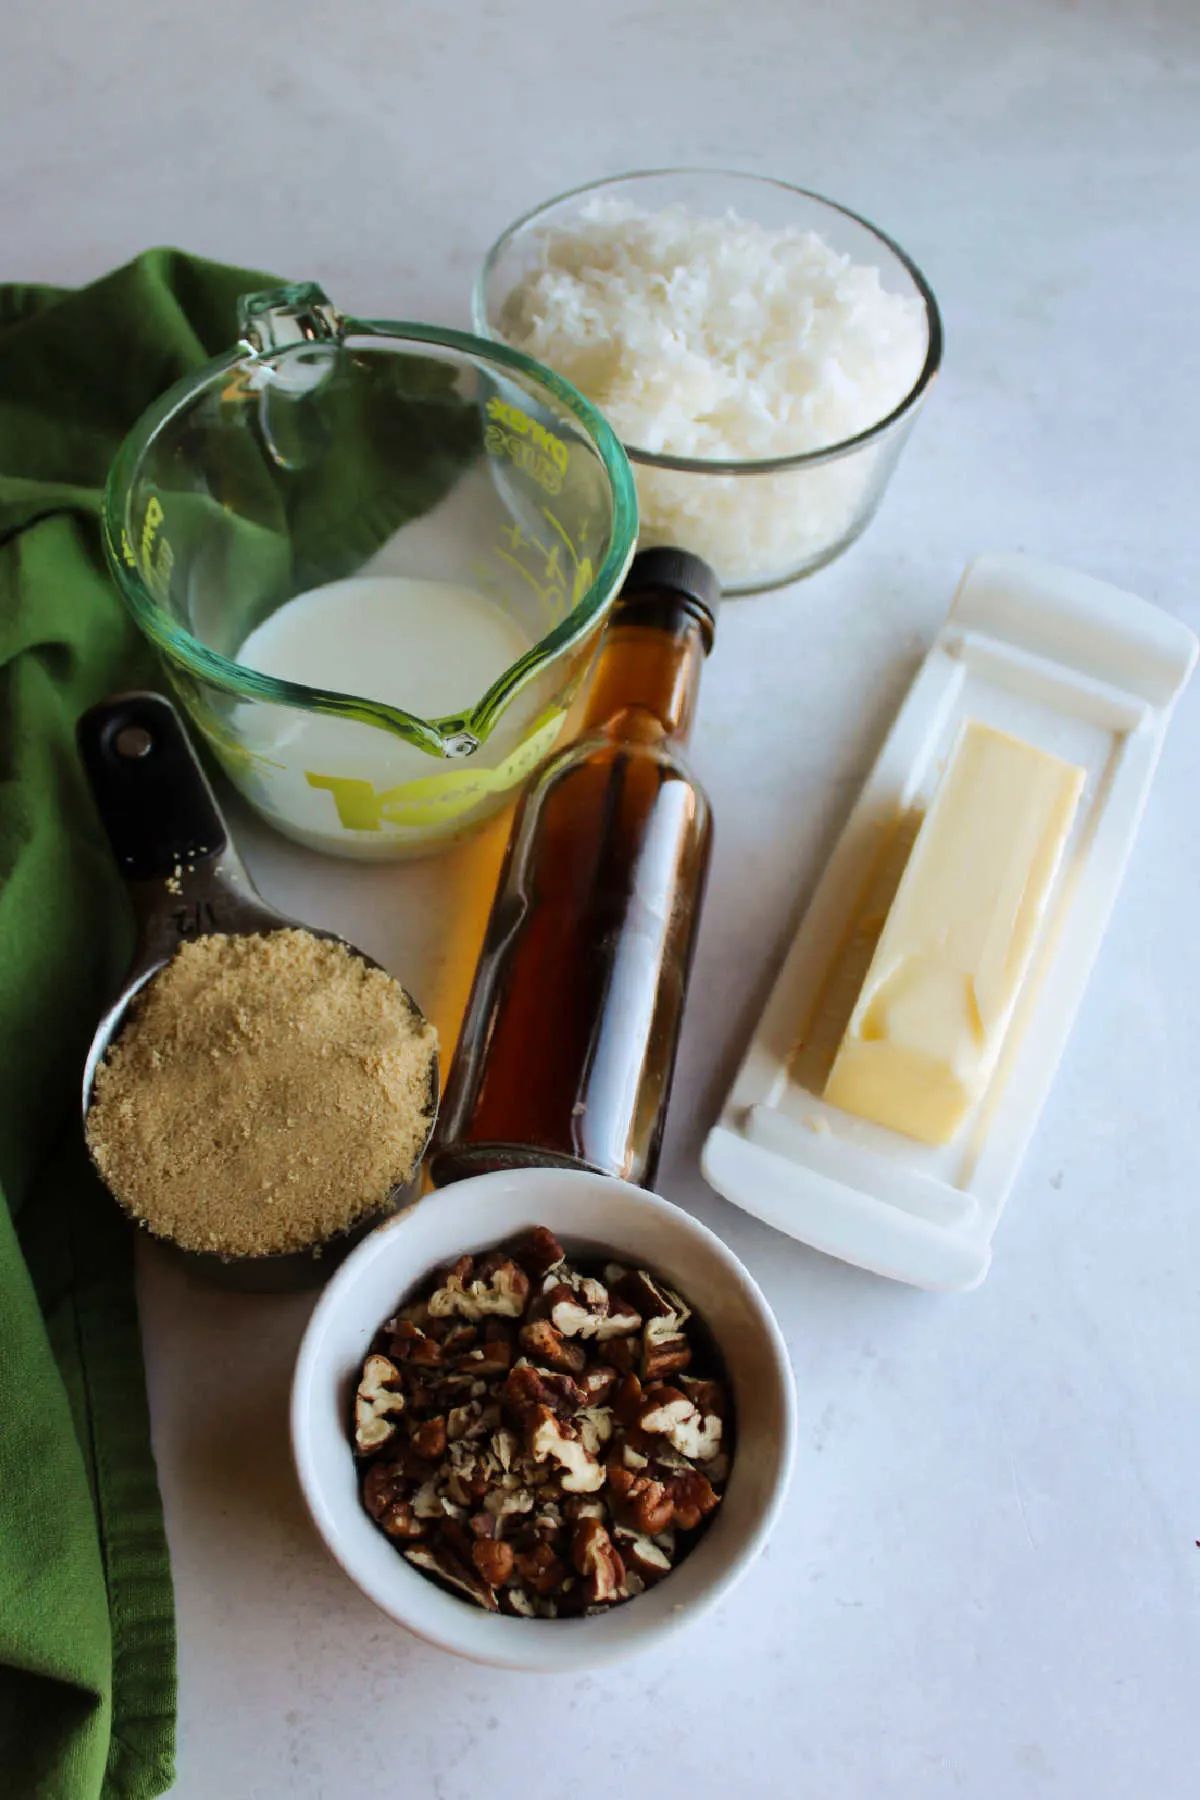 Ingredients for broiled coconut cake topping.